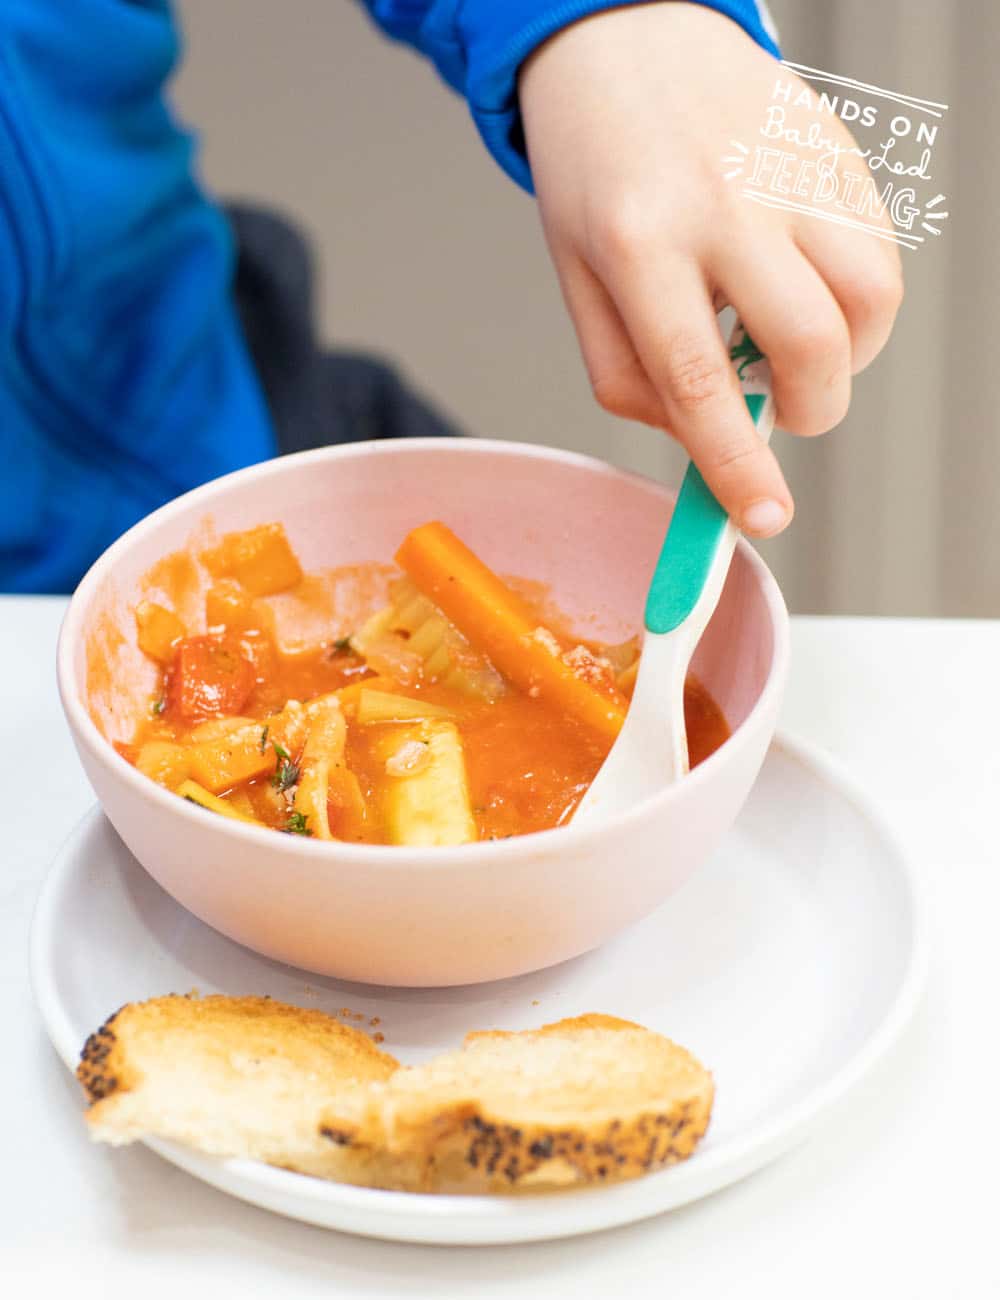 Warm Baby Led Weaning friendly veggie minestrone soup. Cutting veggies correctly for babies is the key to making this soup baby friendly! #soup #babyledweaning #vegan #vegetarian